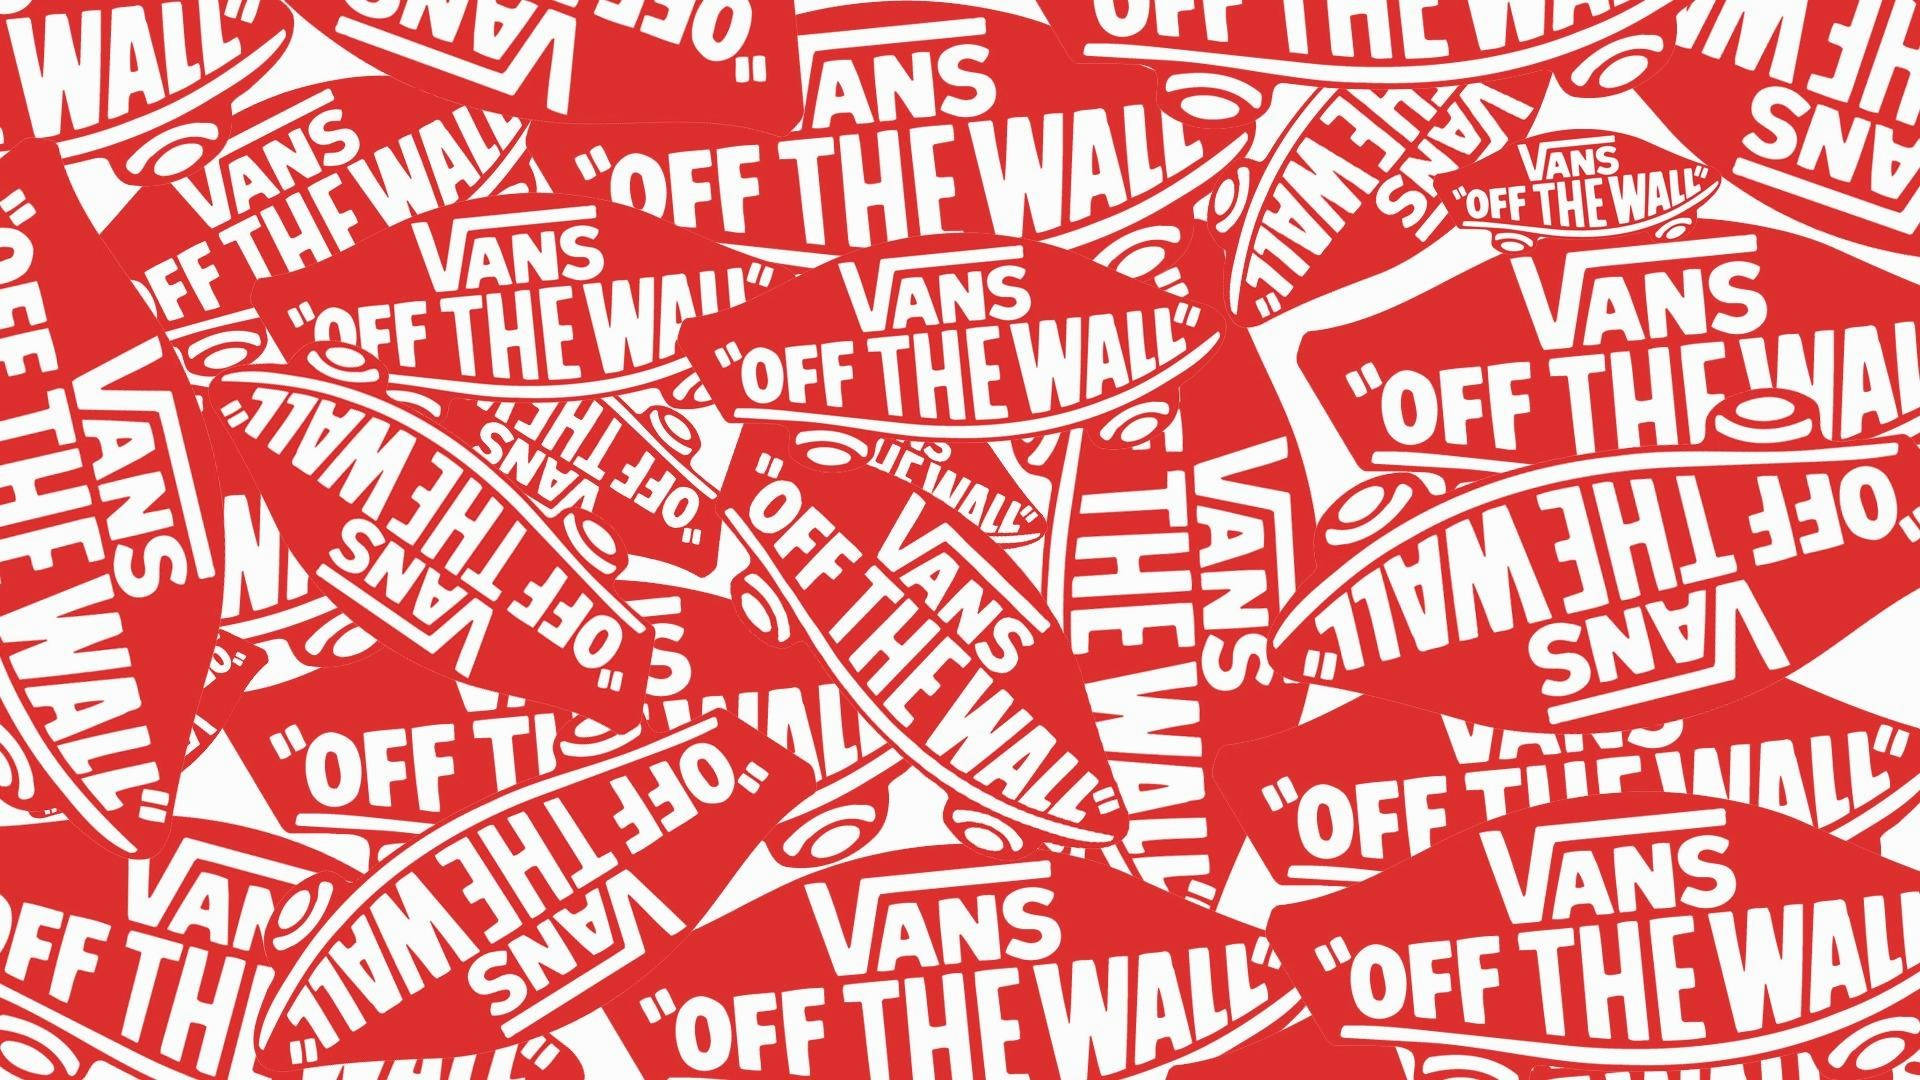 Vibrant Red Vans Off The Wall Sticker Background